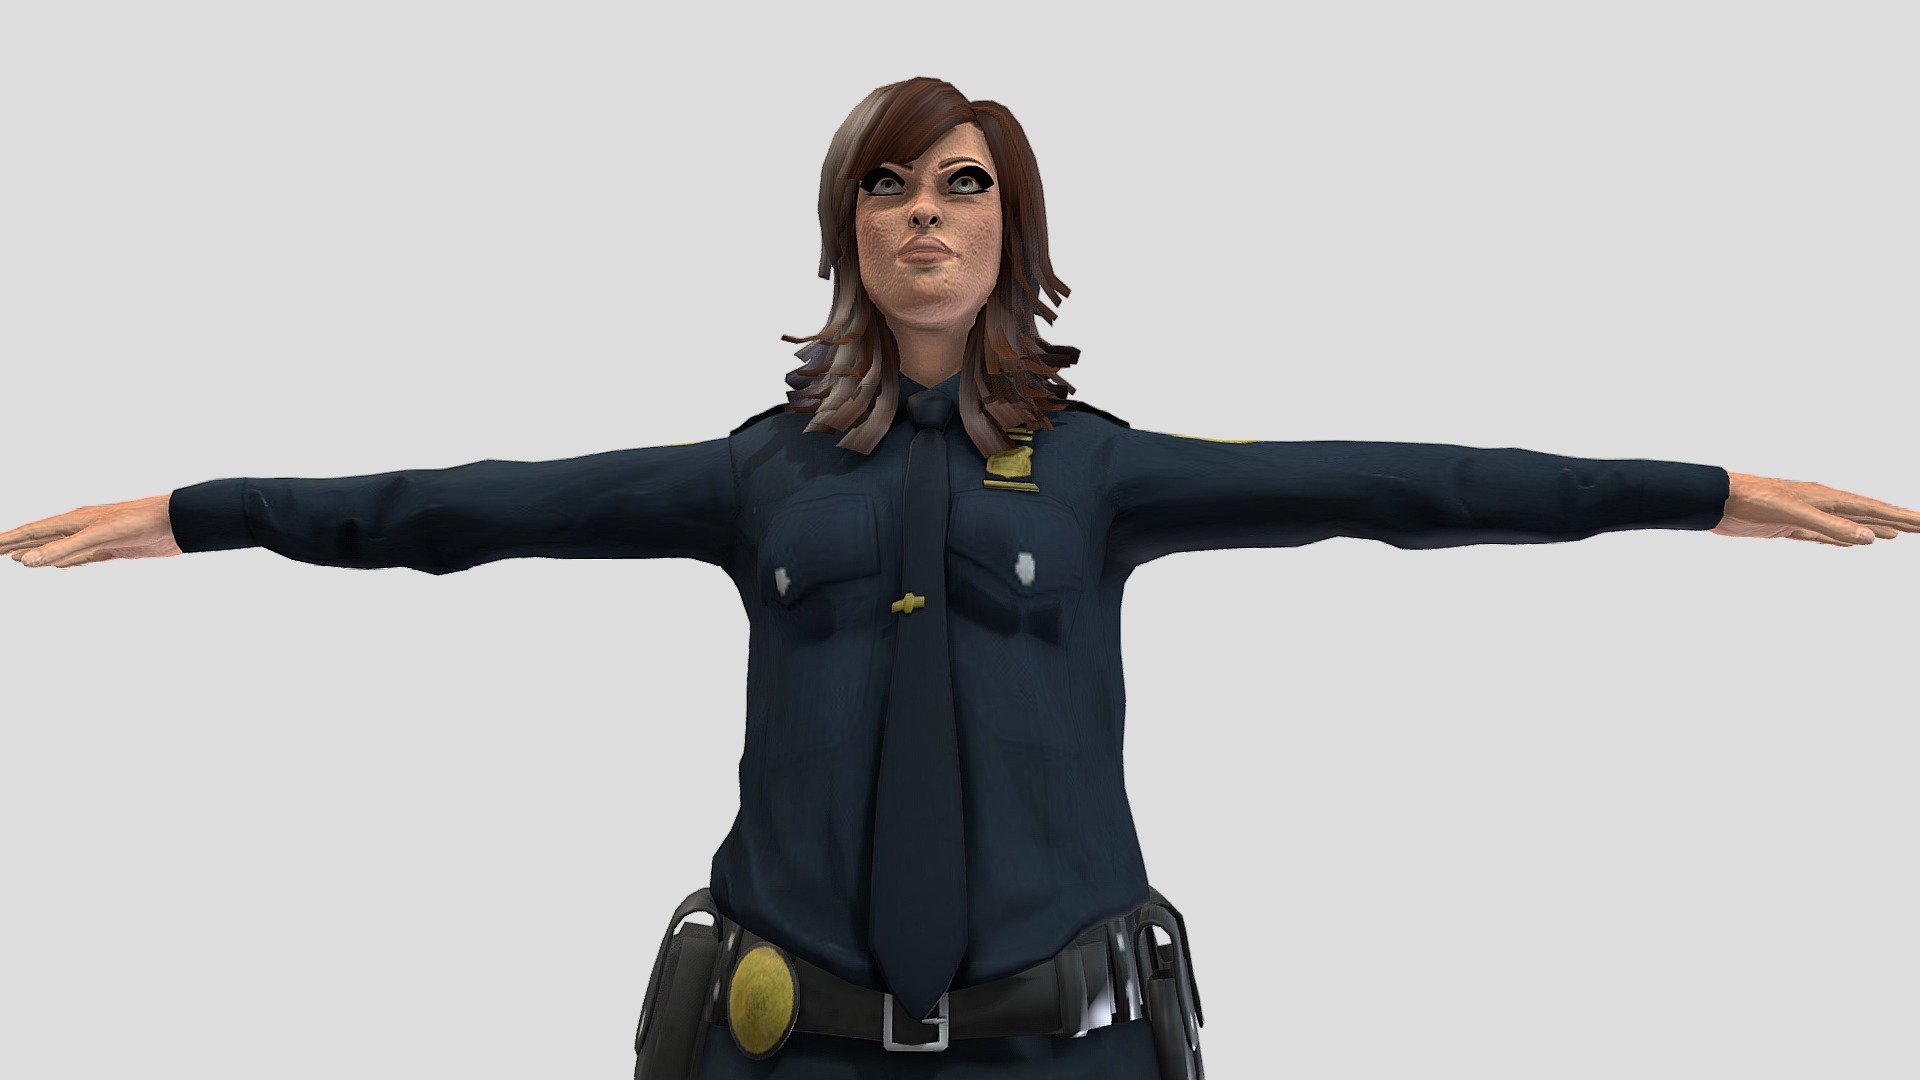 3d Police Woman Download Free 3d Model By Ai 3d Designs Aidesigner1 85962f4 Sketchfab 